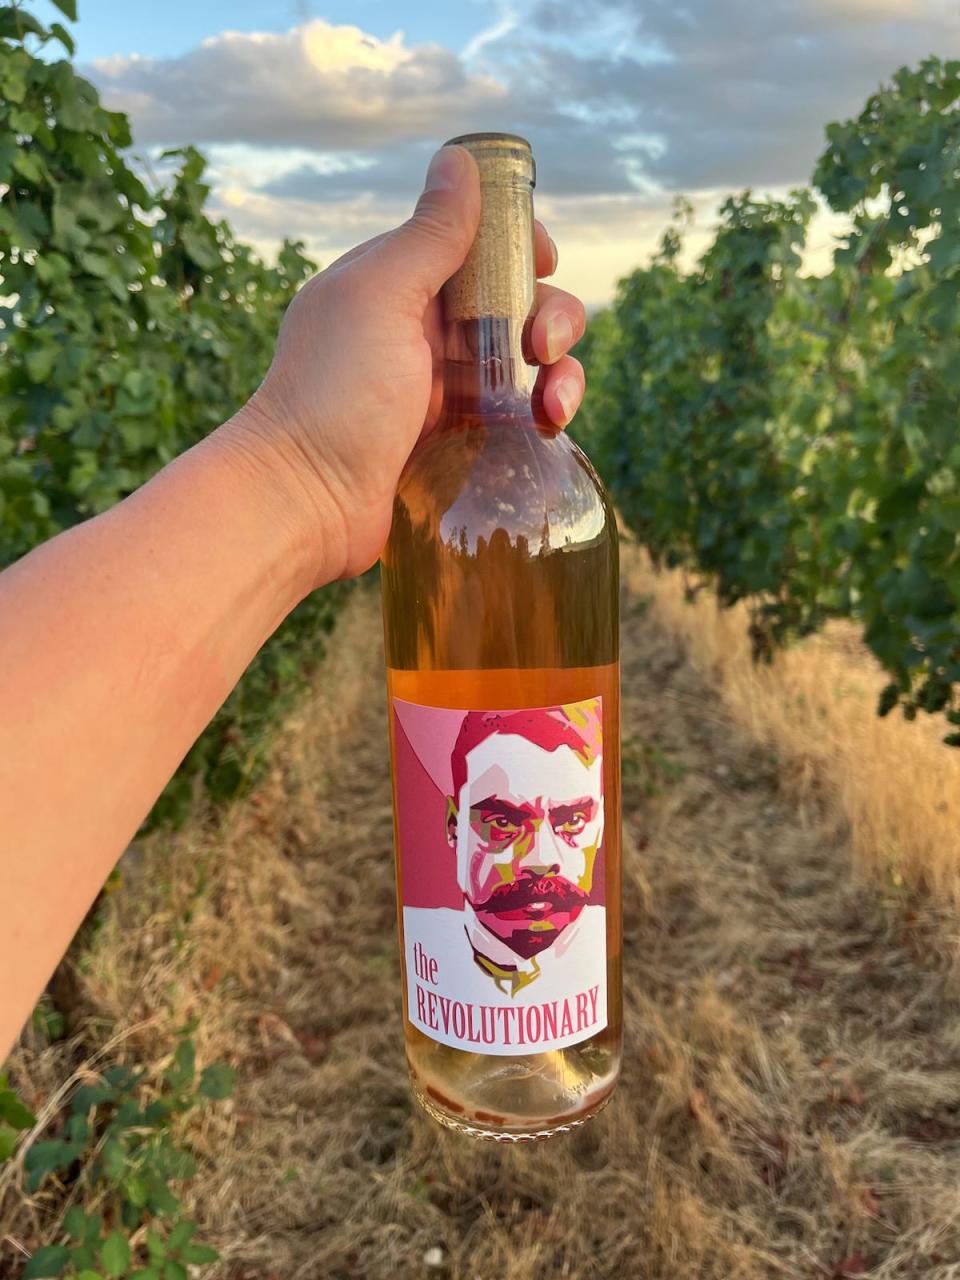 The Revolutionary Rose of Petit Verdot from Gonzales Wine Co. features the images of Emiliano Zapata, in honor of owner Cristina Gonzales' heritage. Her father is named Emiliano, her son Julian's first name is Emiliano, and he was born where the Zapatista movement was based in Mexico.